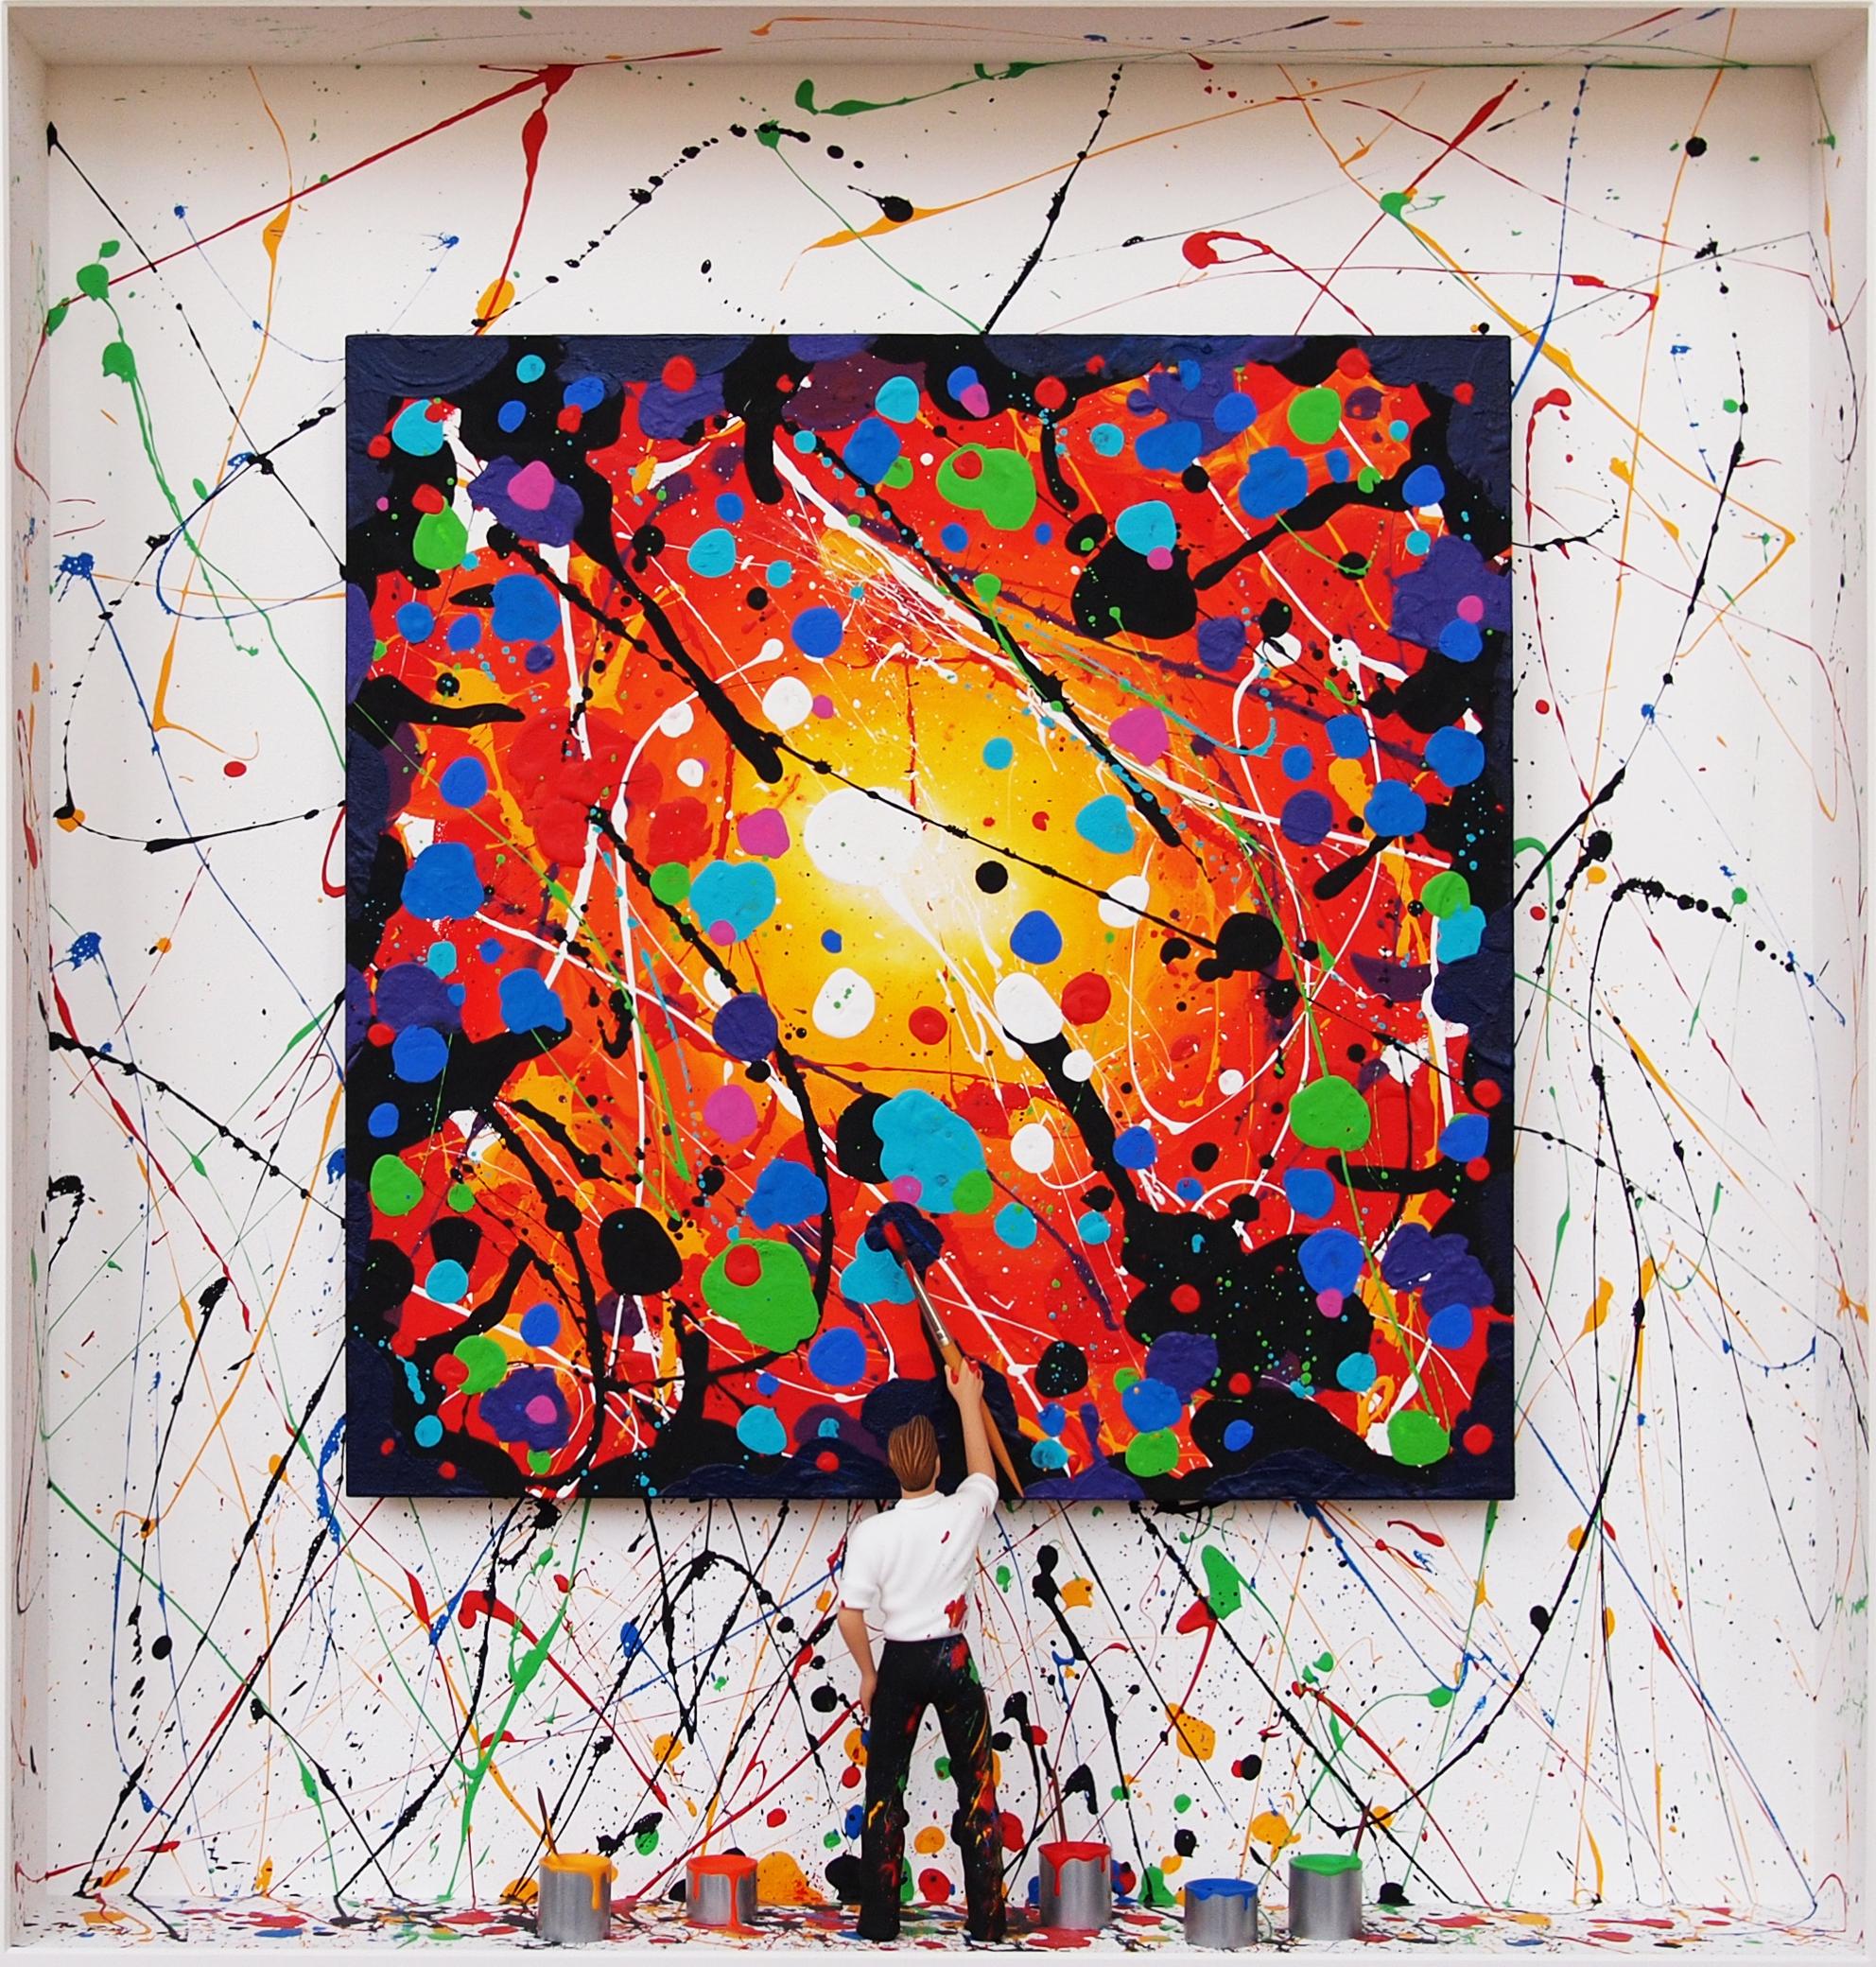 Big Splash - contemporary art in boxes work by Volker Kuhn large abstract splash